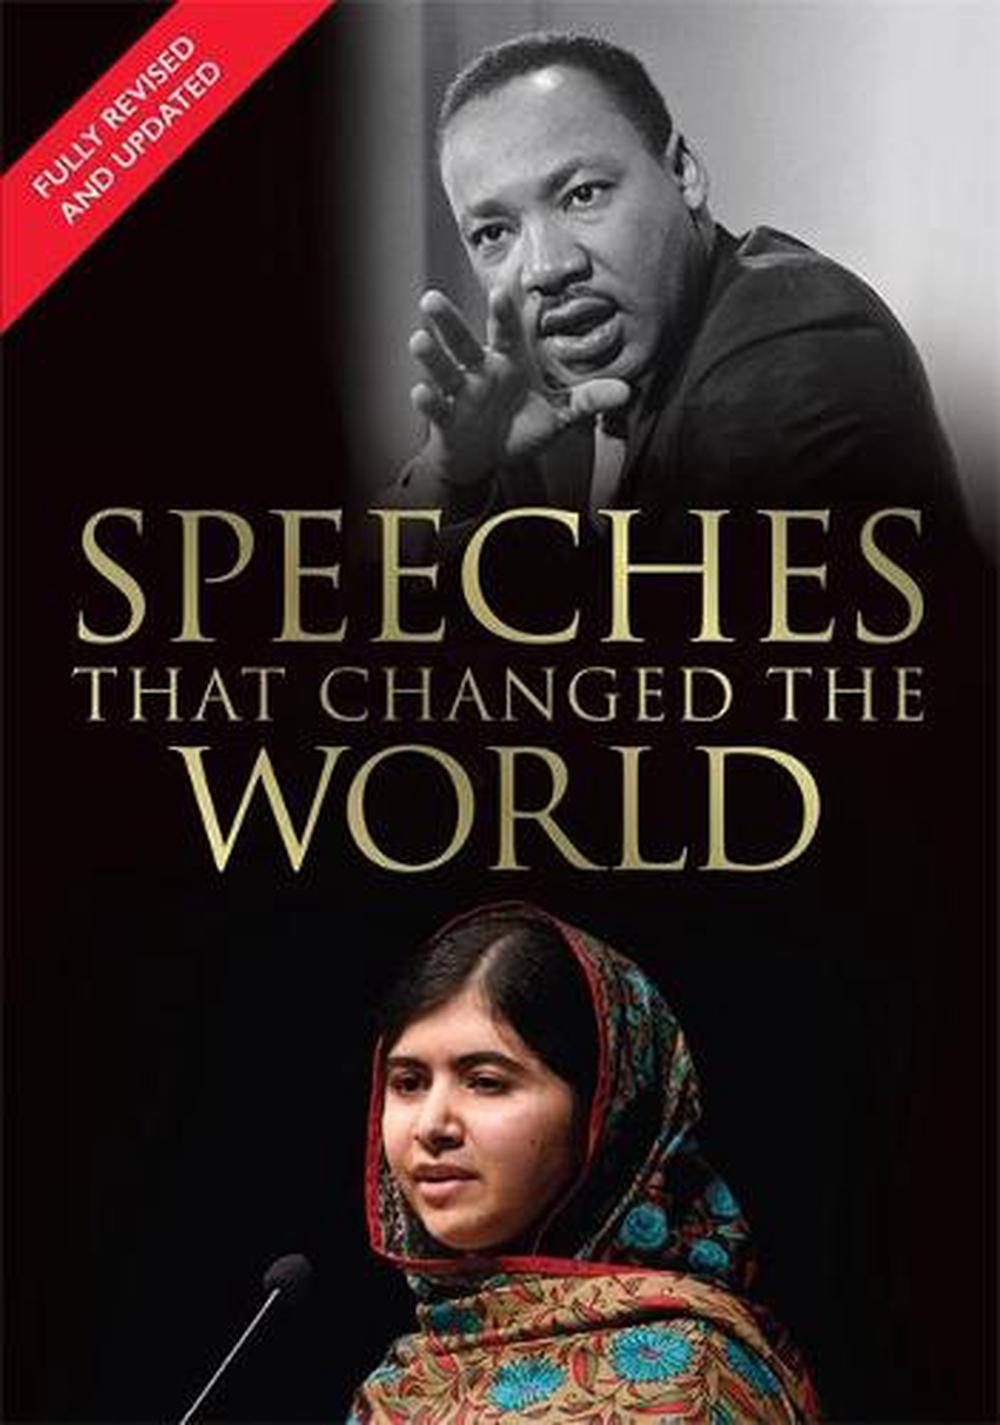 writings and speeches that changed the world